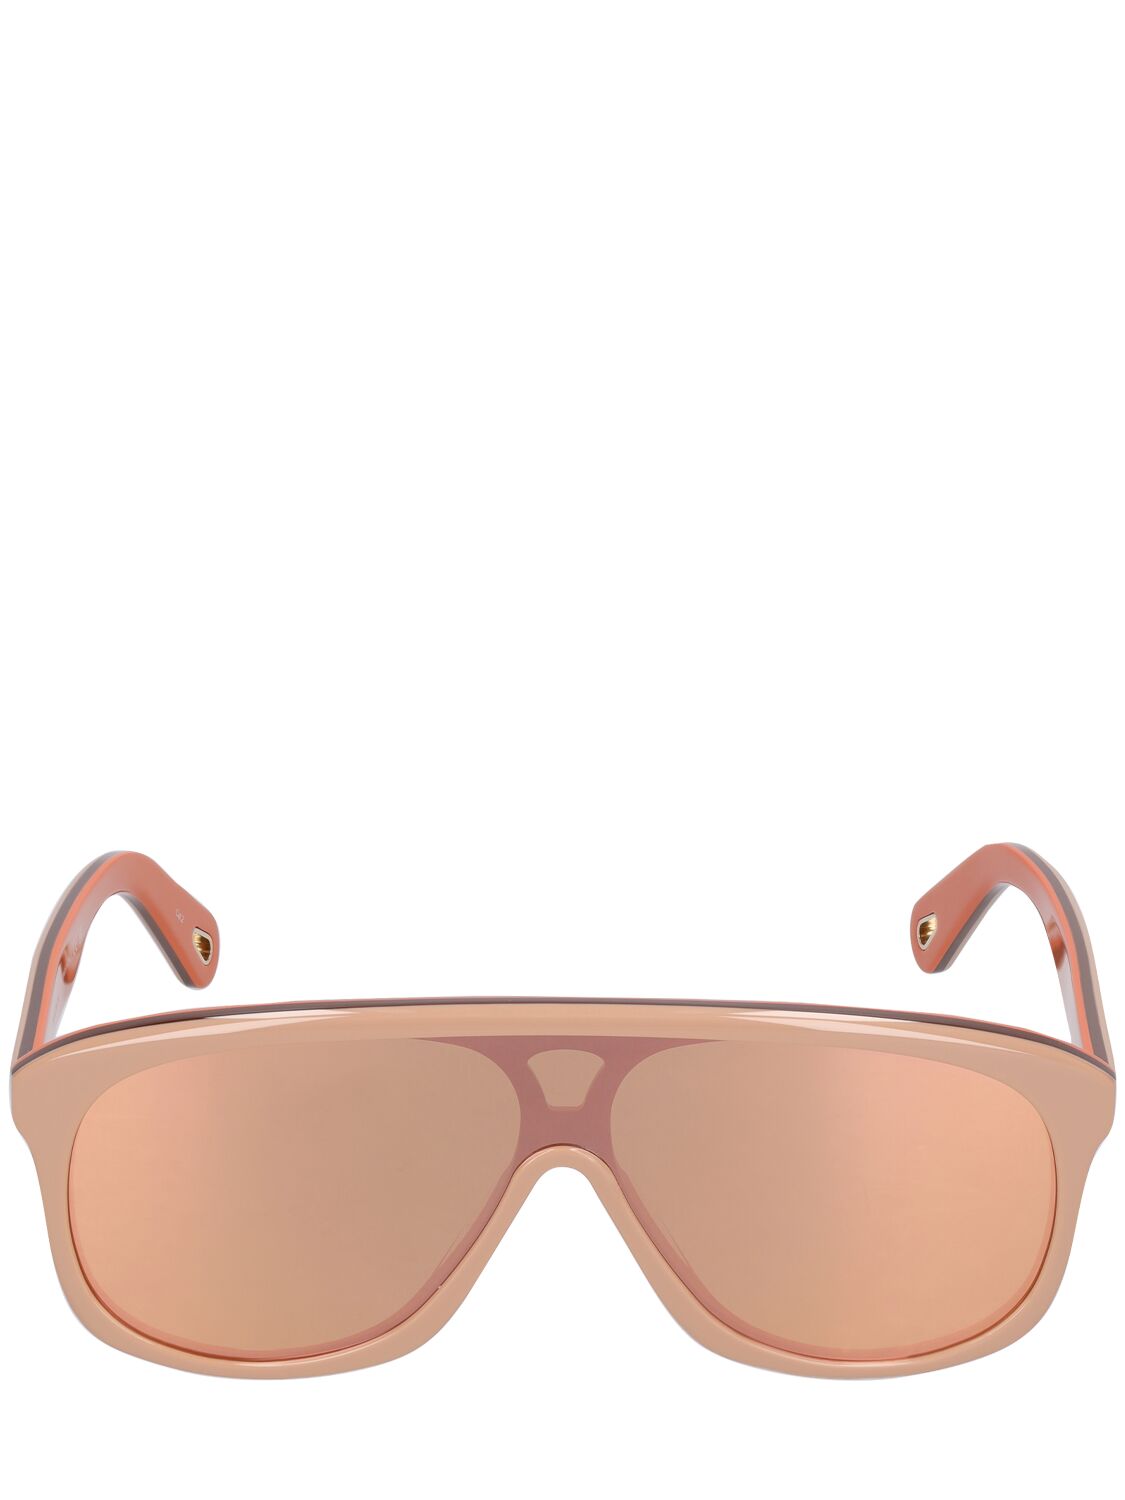 Chloé Mountaineering After Ski Sunglasses